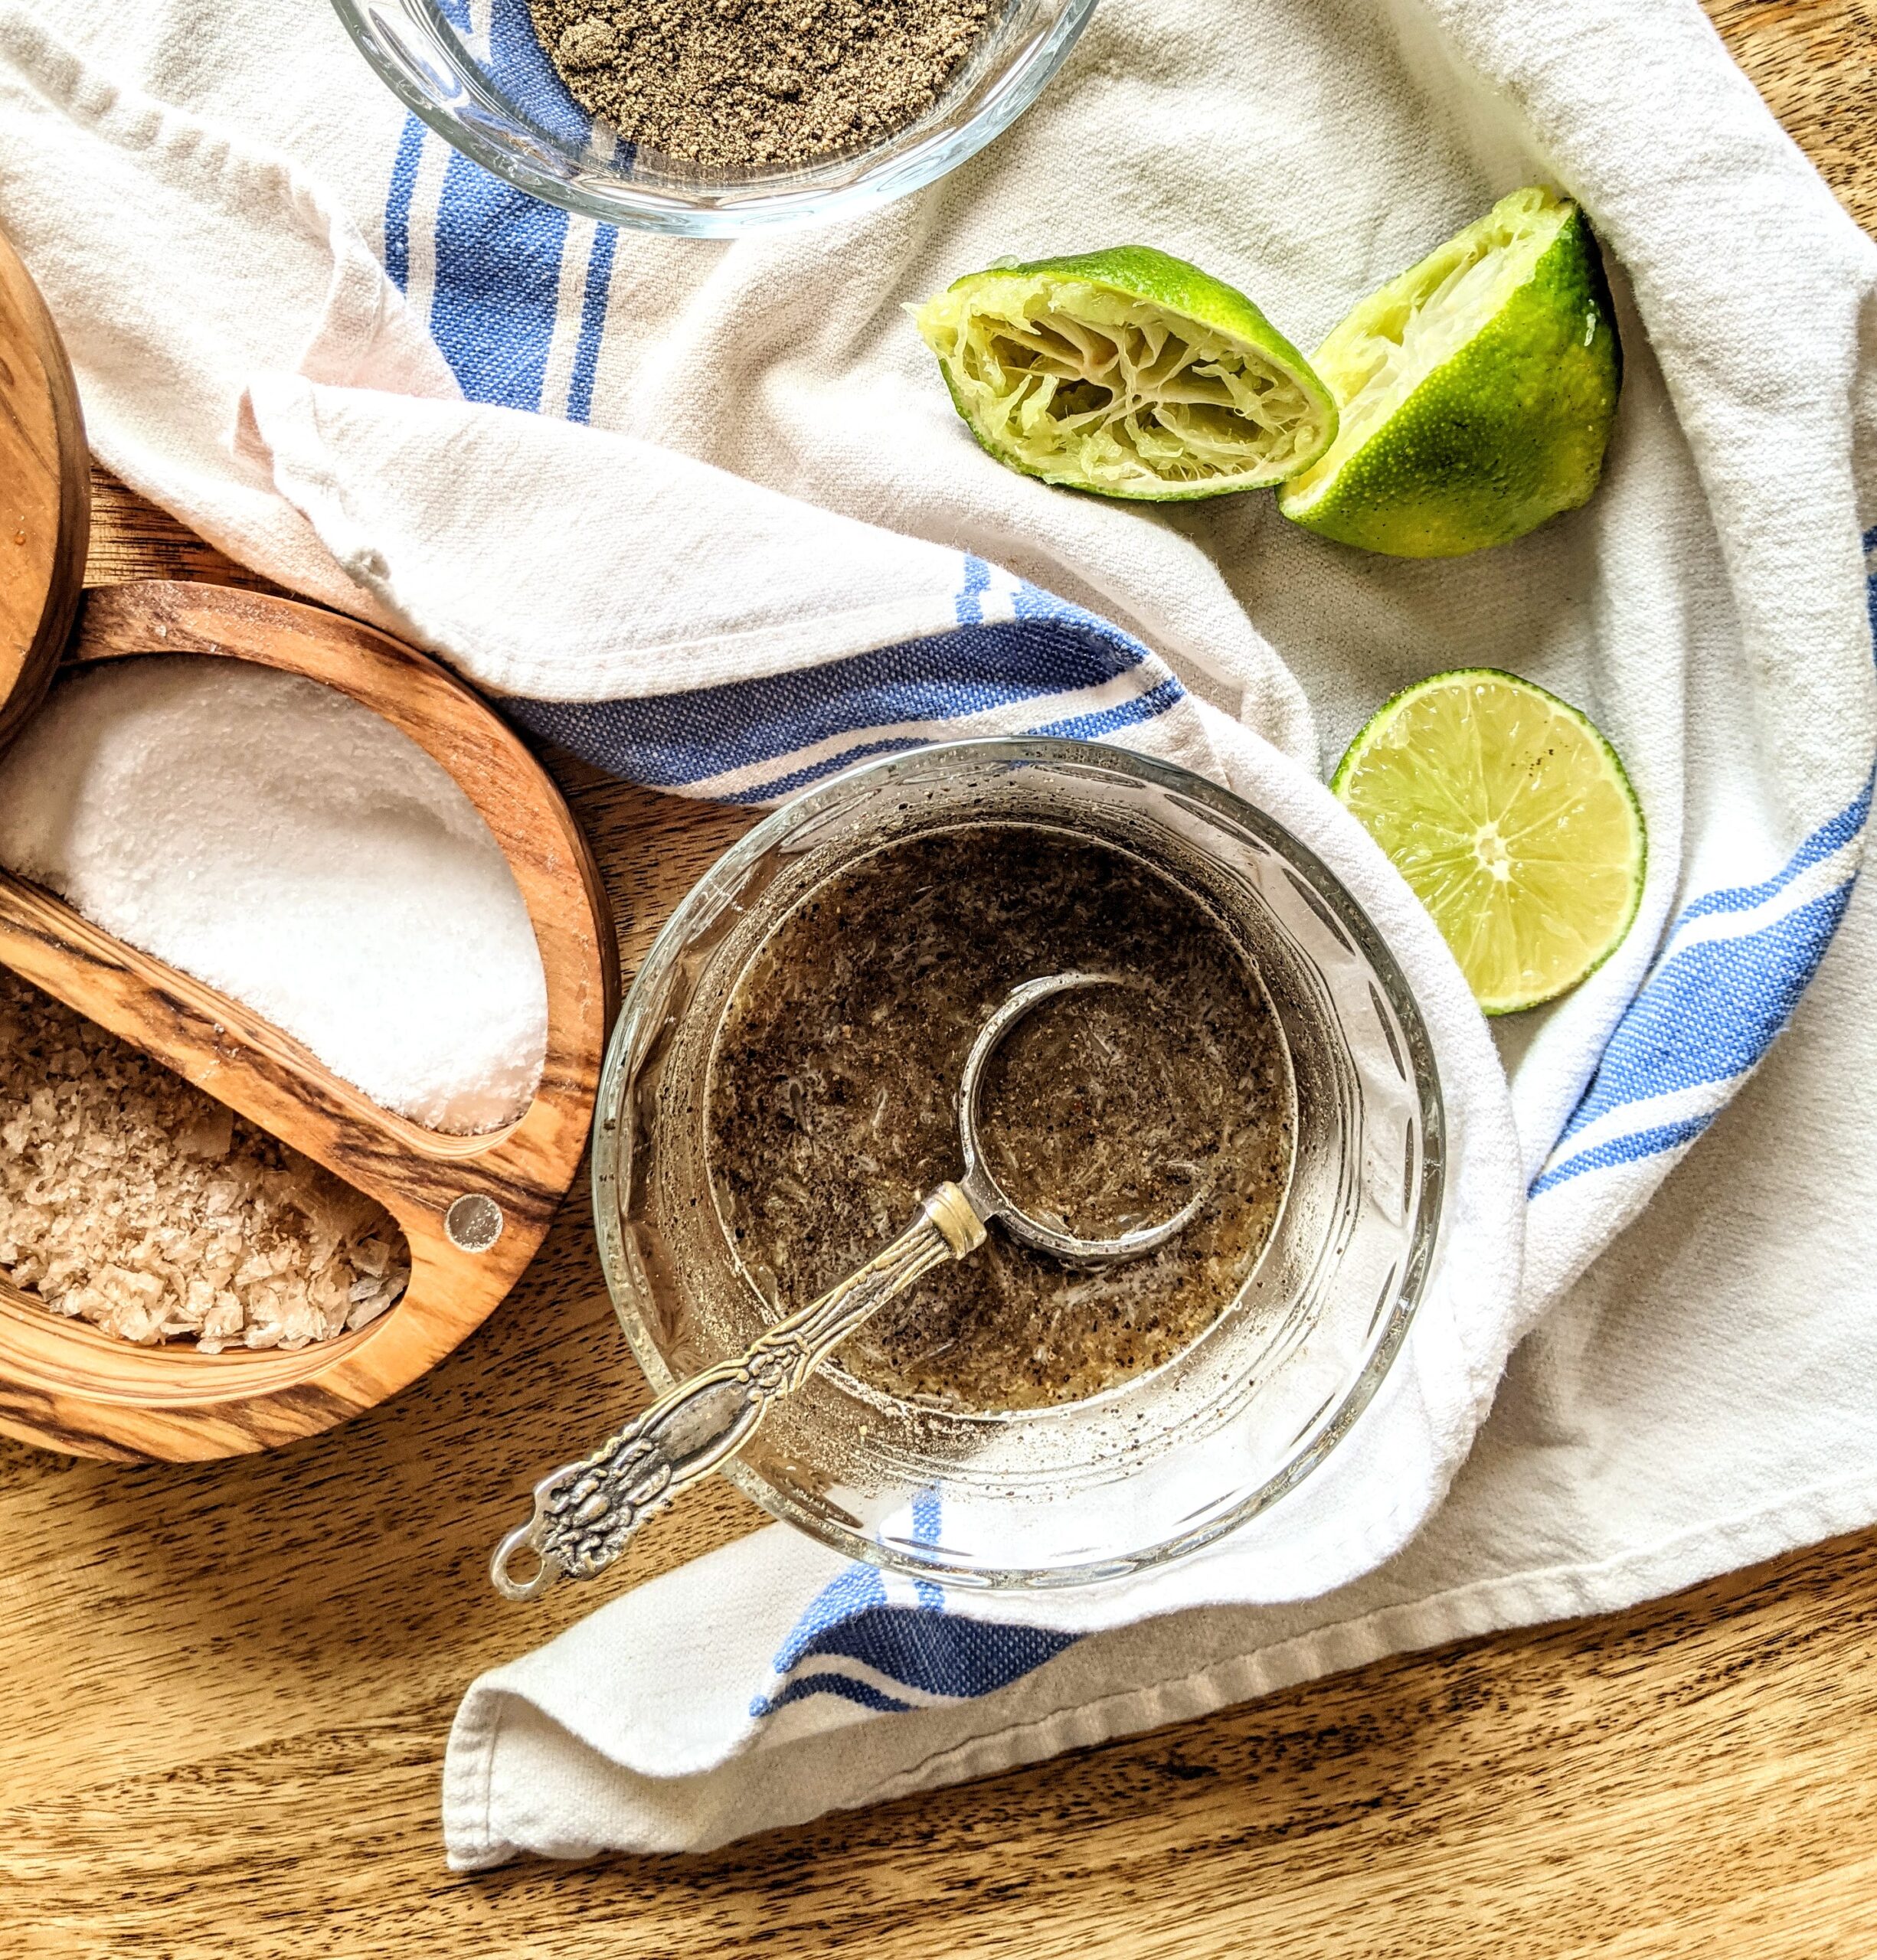 A small bowl of fresh lime juice, salt, and freshly toasted and ground pepper, just waiting to be spooned over your rice or used as a dipping sauce.